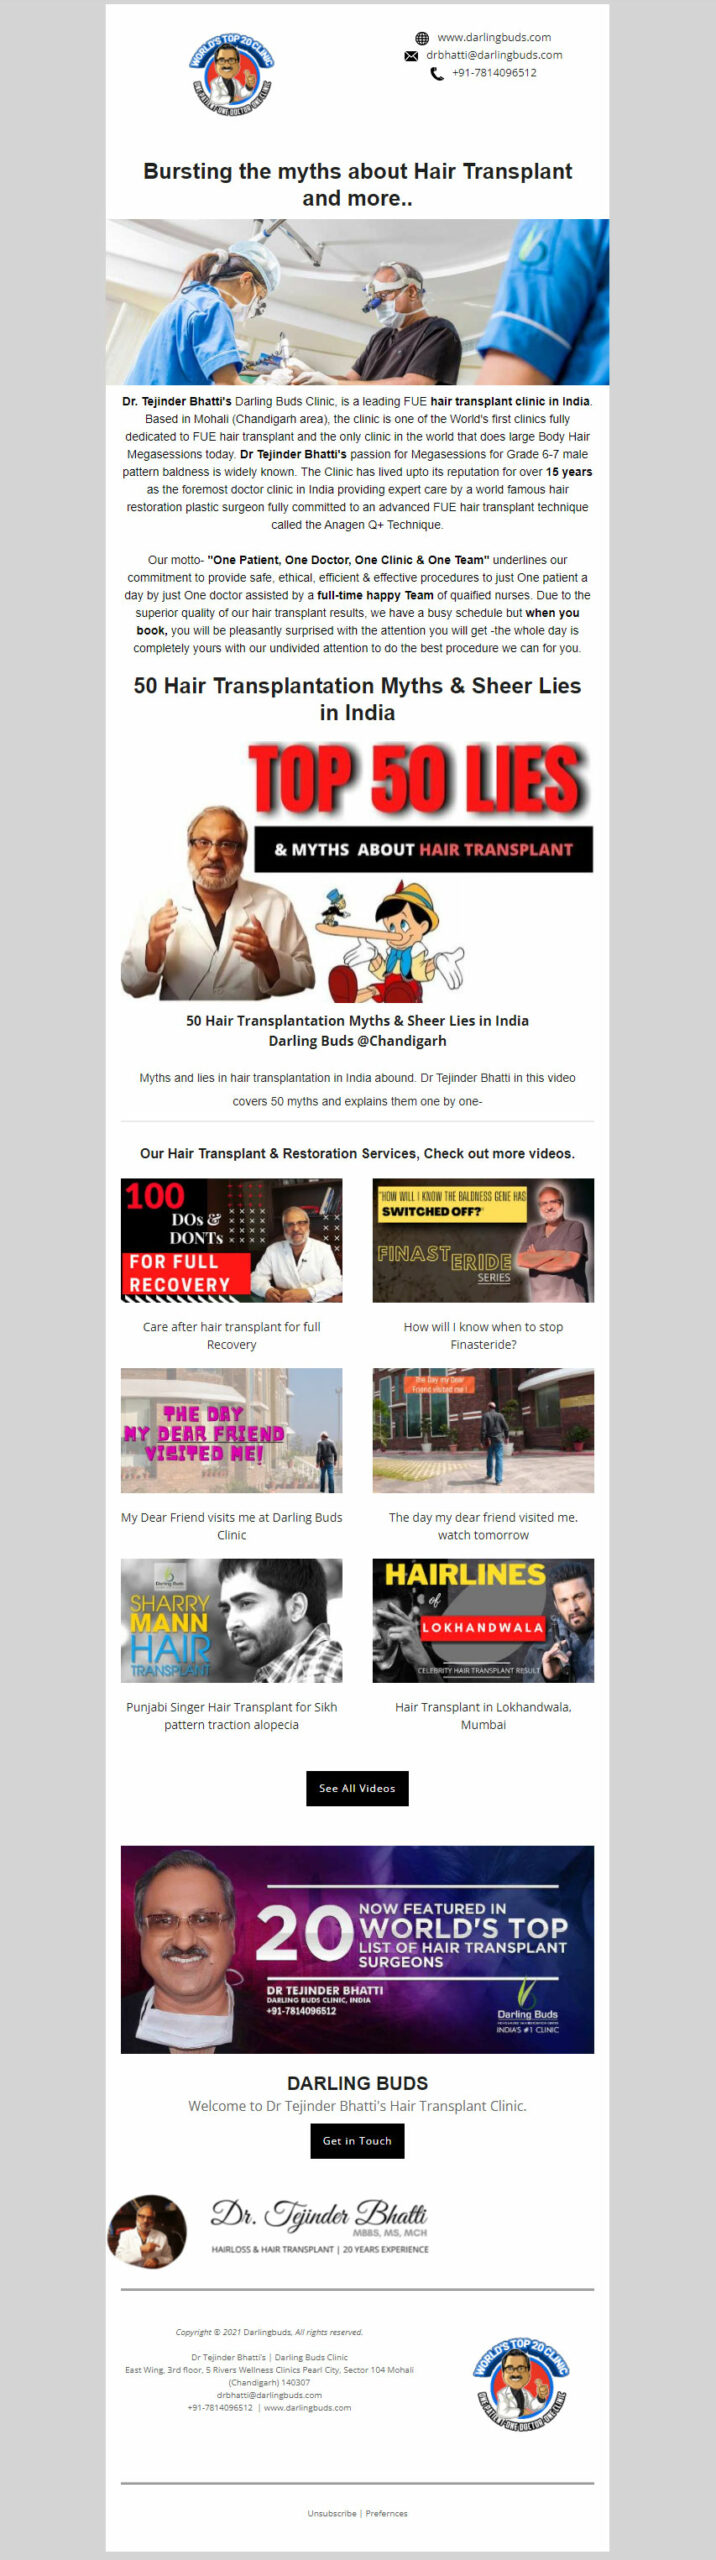 Email templates for promote your Hair Transplant clinic